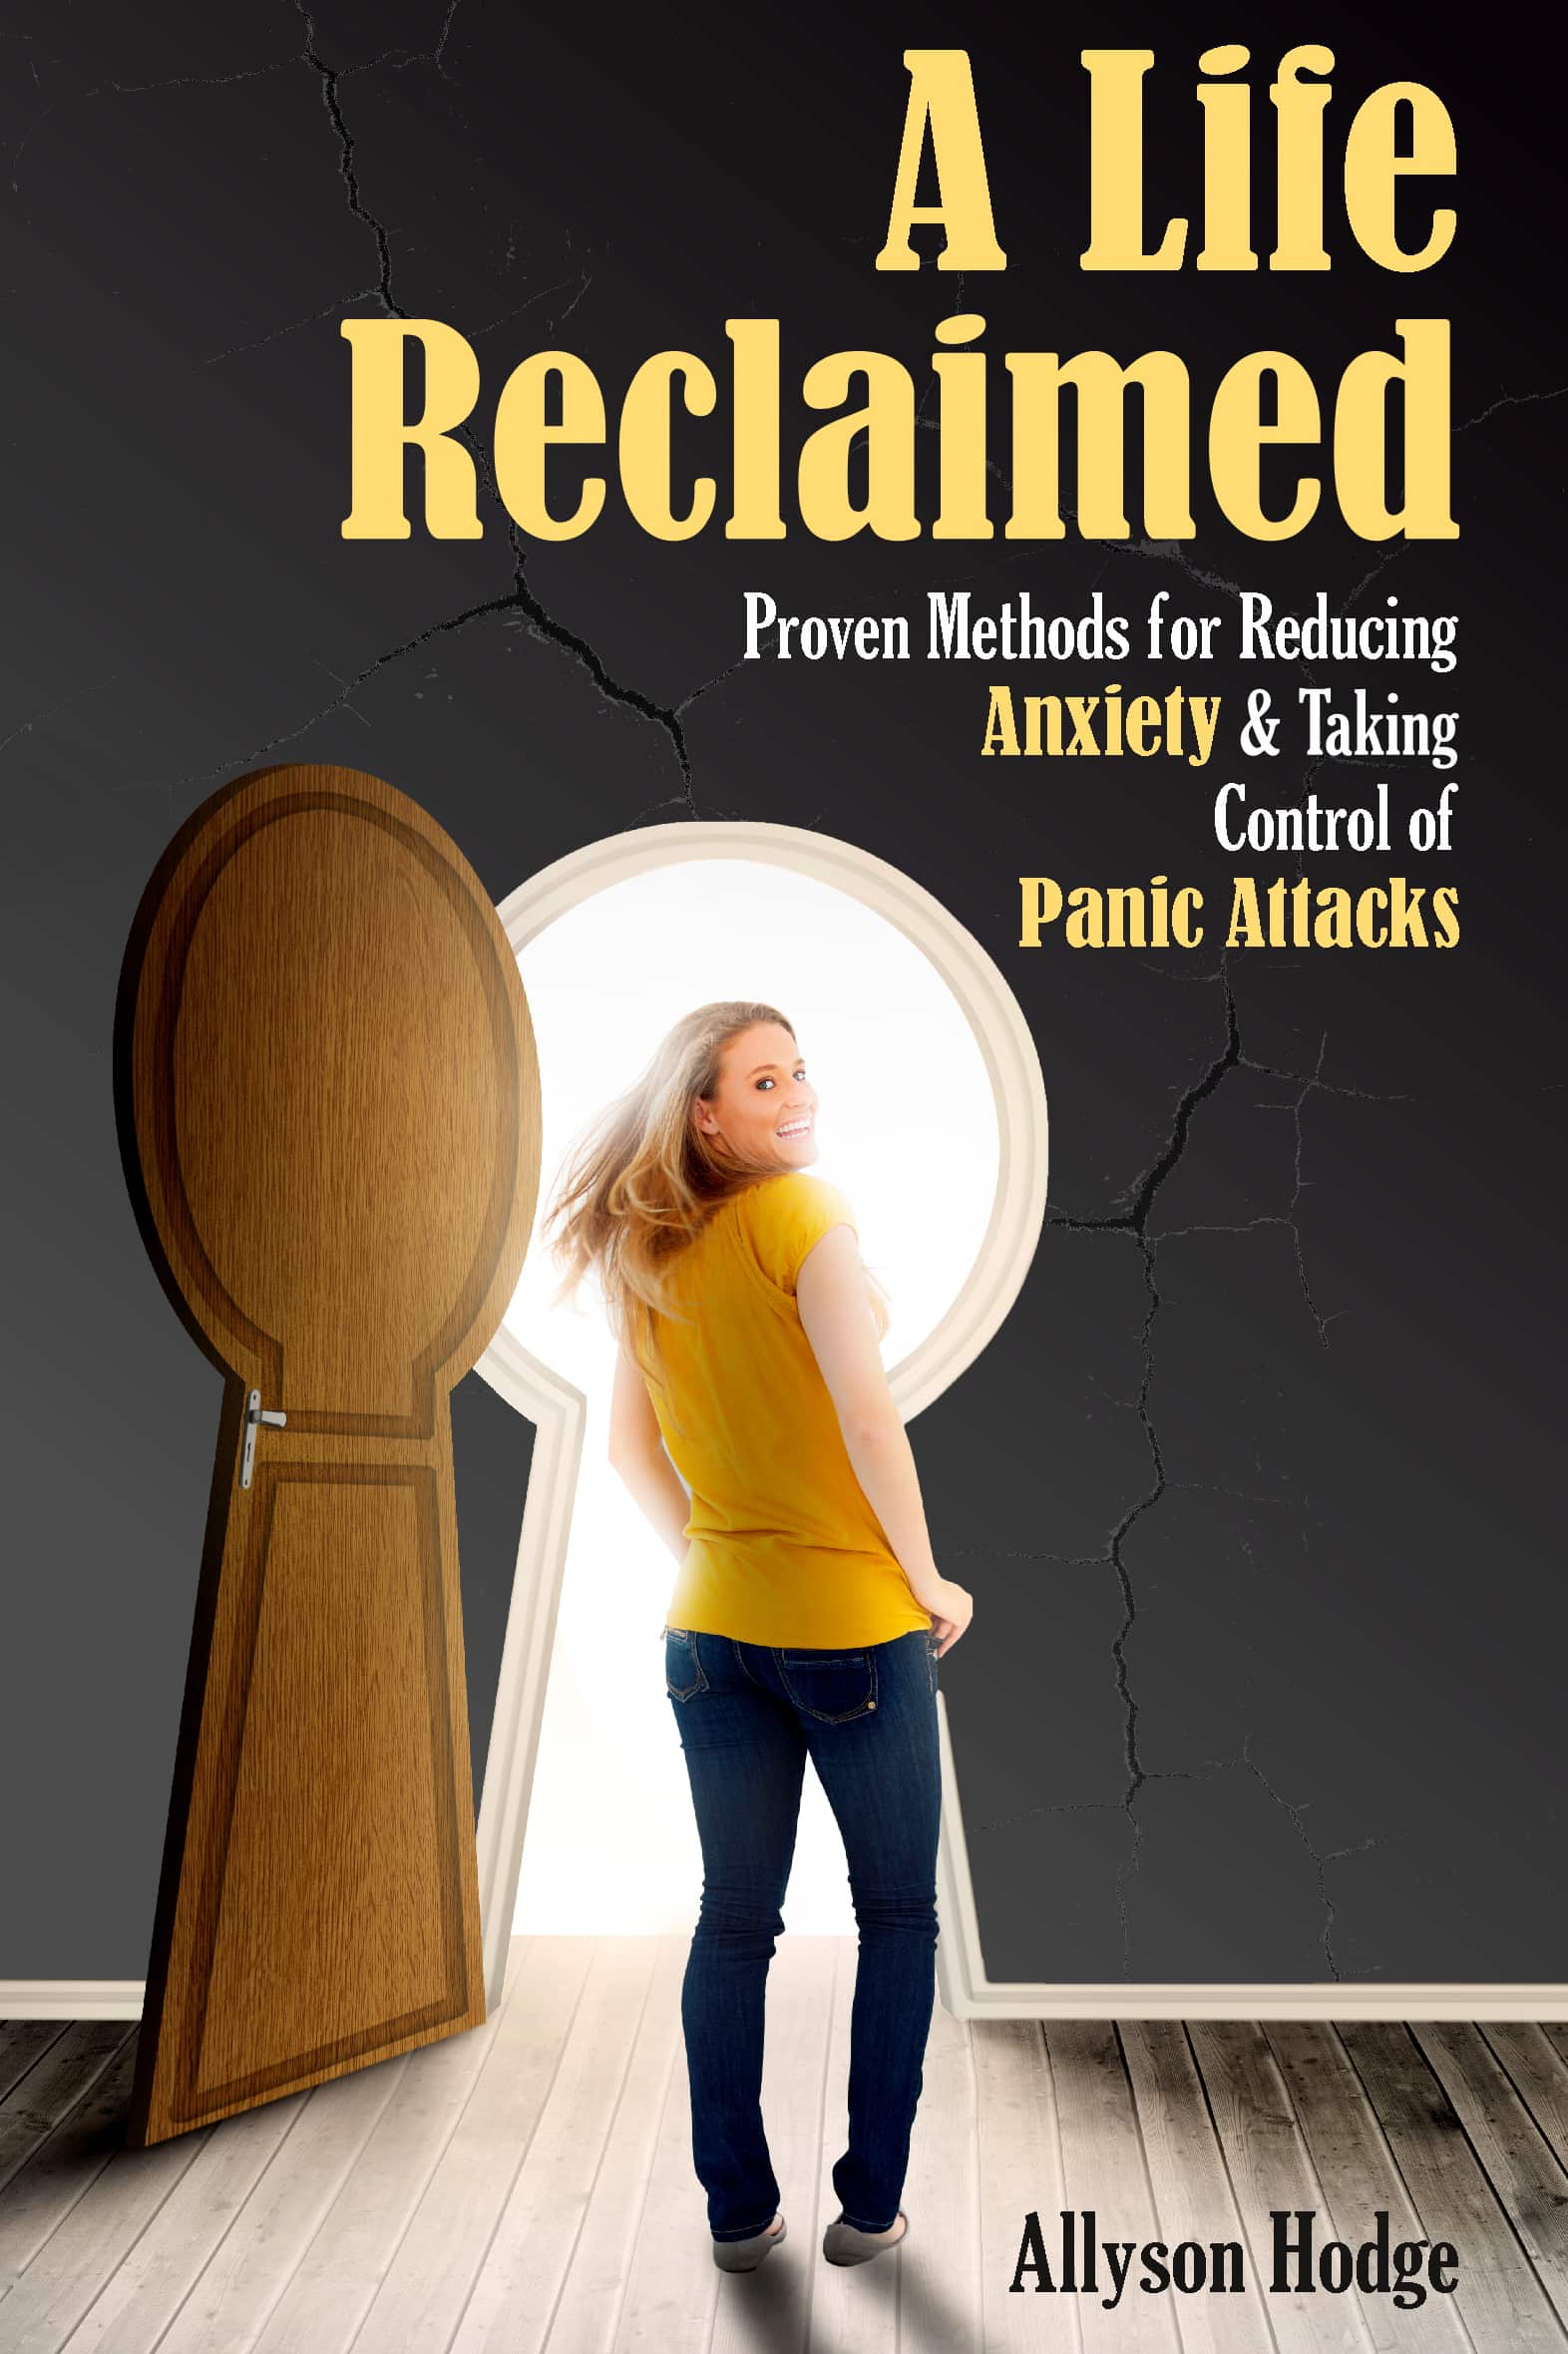 FREE: A Life Reclaimed: Proven Methods for Reducing Anxiety and Taking Control of Panic Attacks by Allyson Hodge